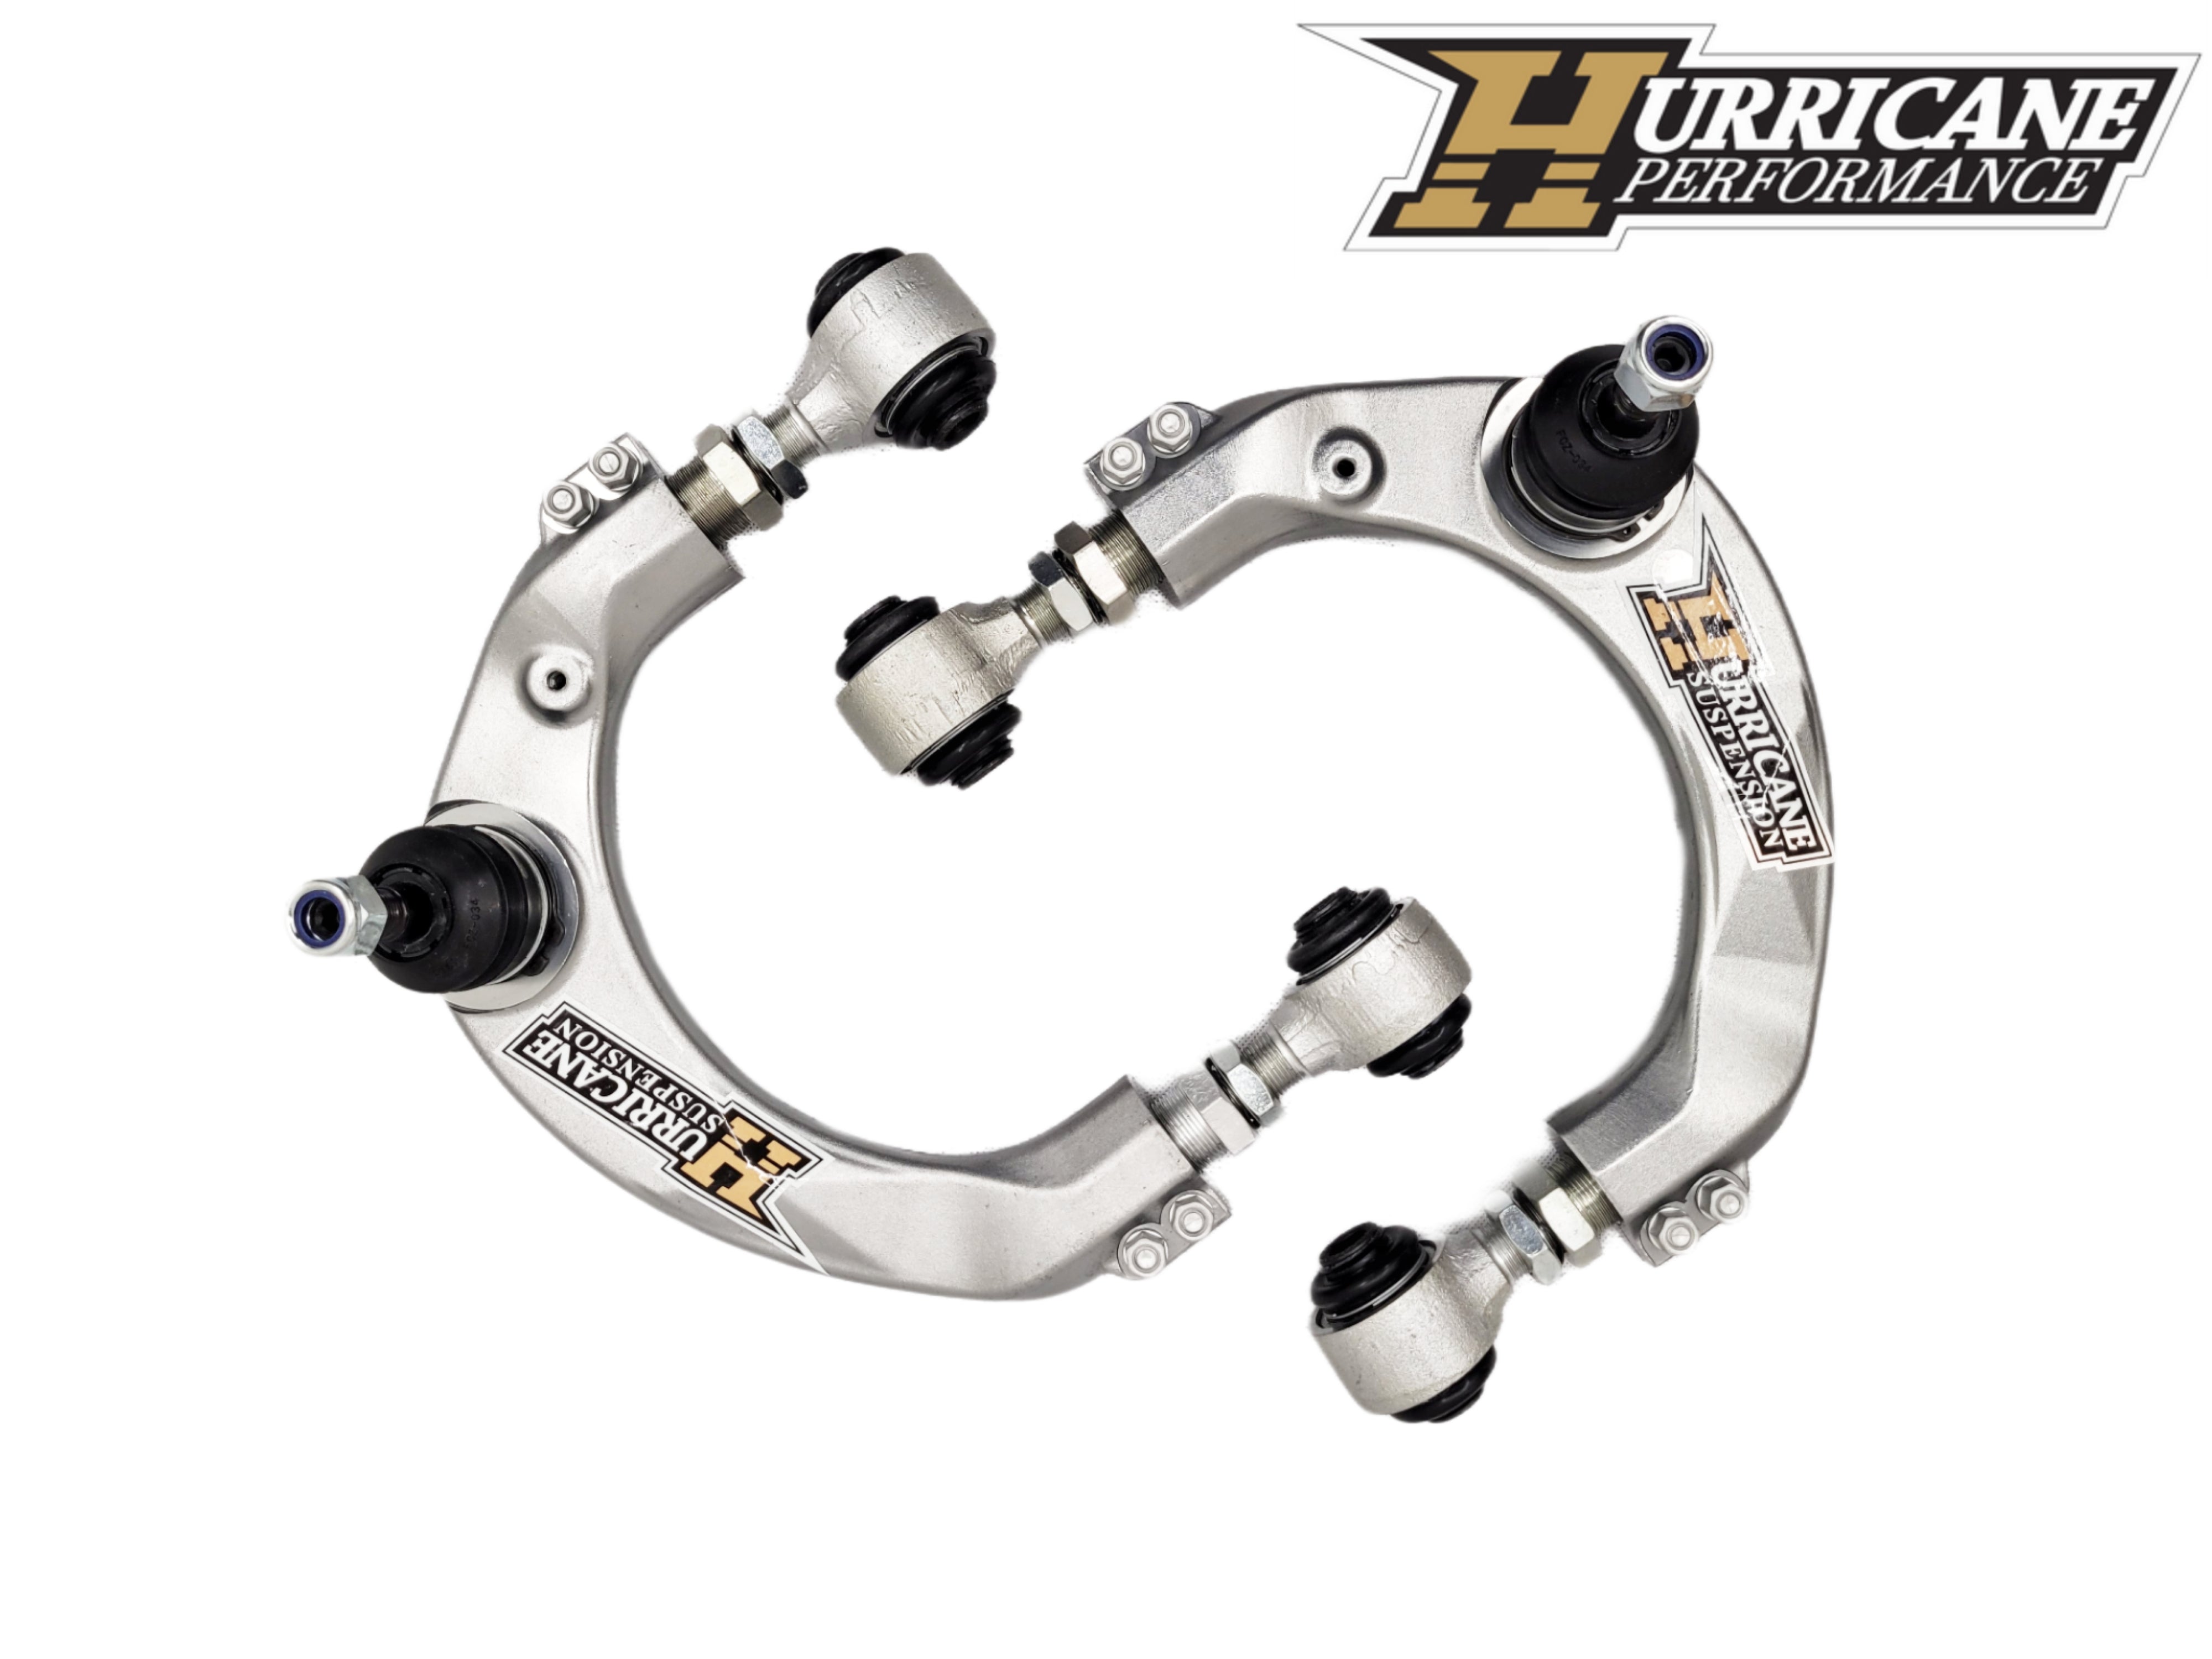 HURRICANE PERFORMANCE PRO FORGED ALUMINUM FRONT UPPER CONTROL ARMS FOR FJ CRUISER, 4RUNNER ,LC120,LC150 Tacoma 05+